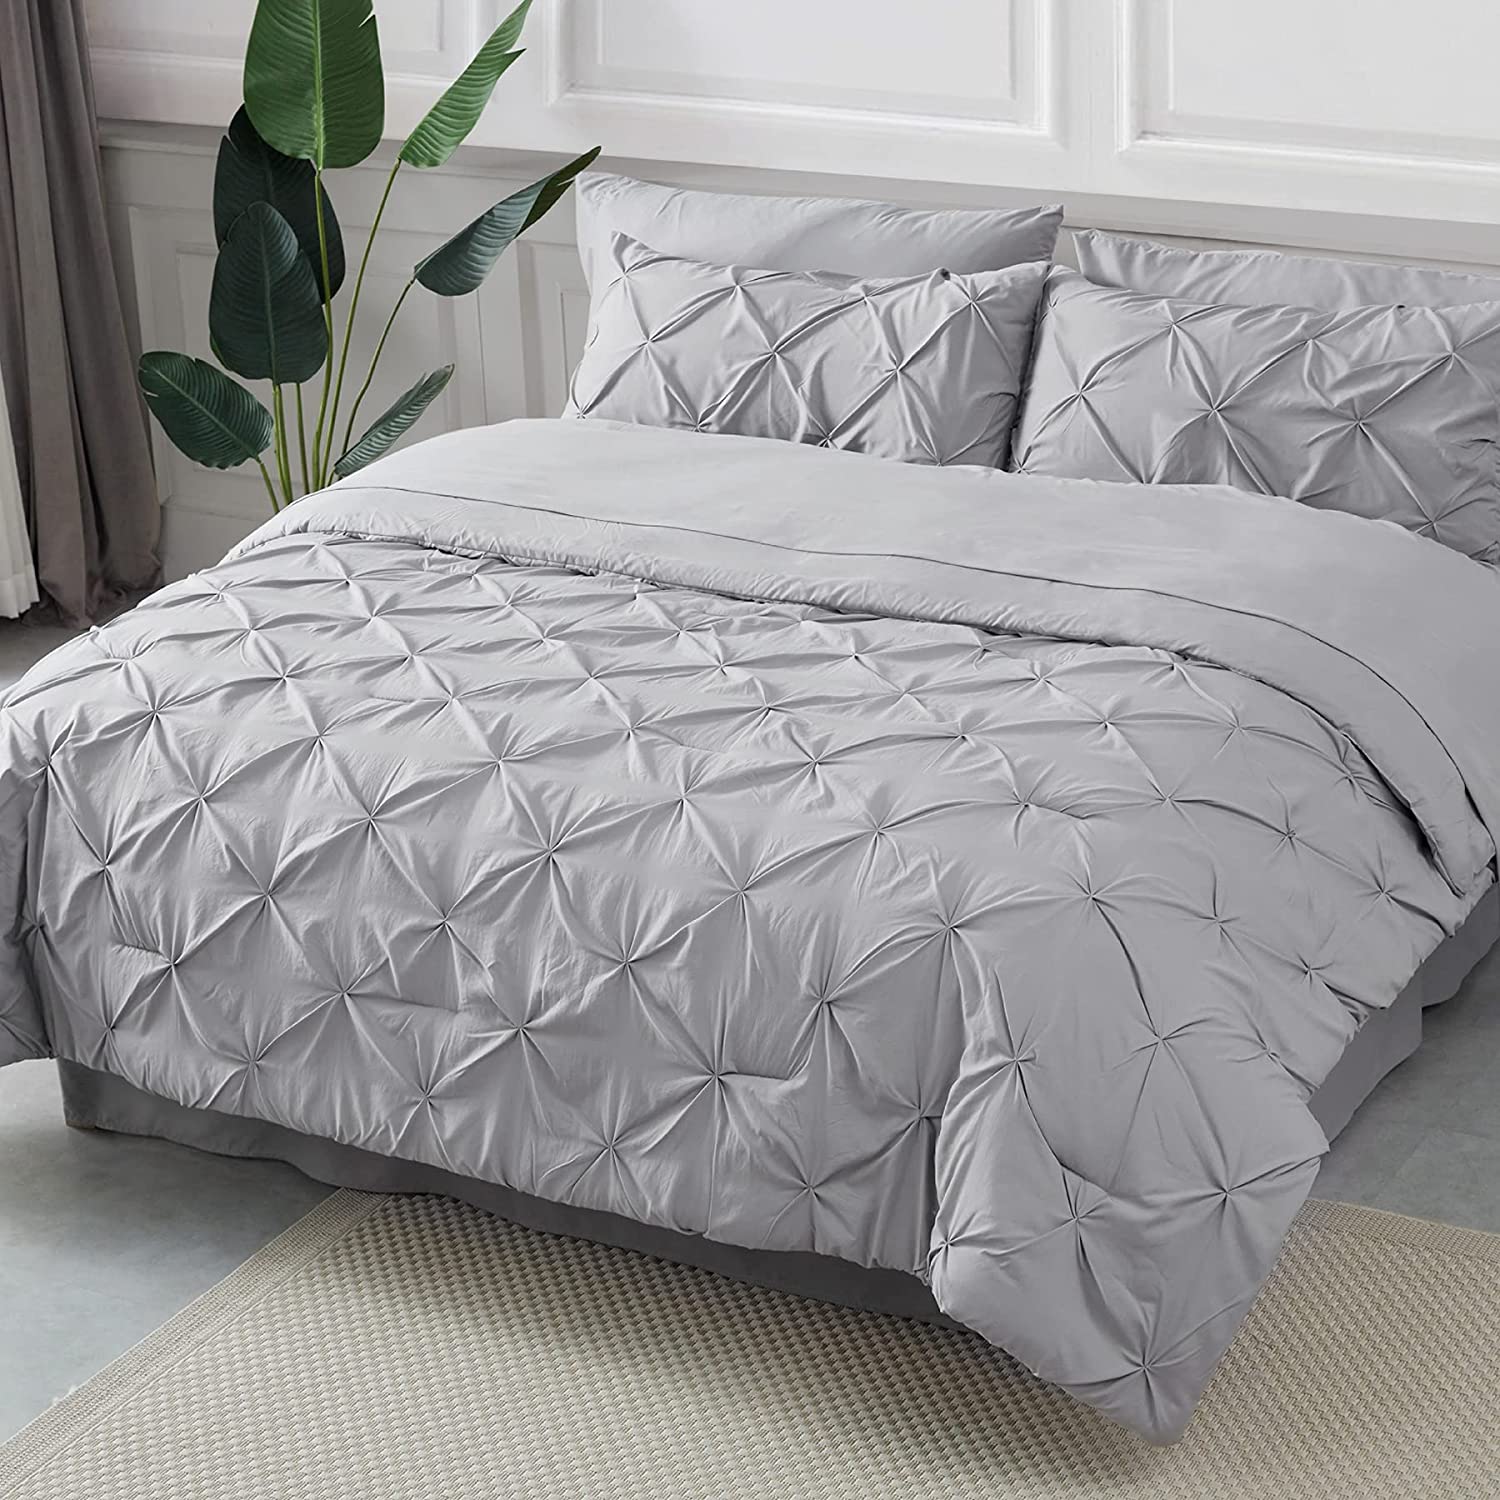 Embossed Geometric Bedding Duvet Bedspread Throw Over Combi Double King Size 